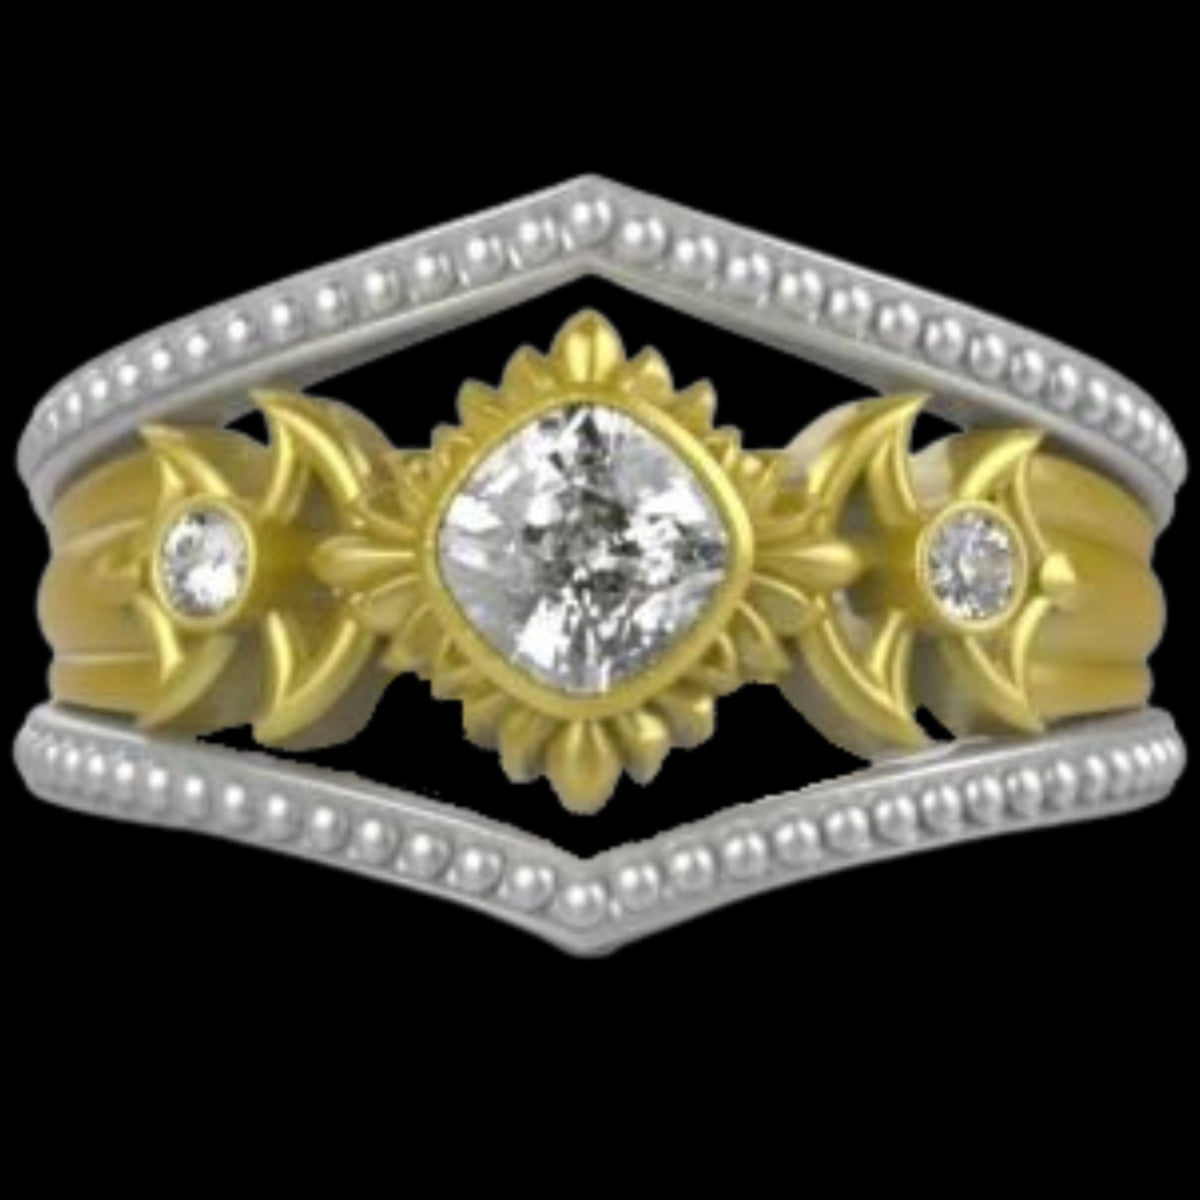 SUN AND MOON - 14KT with Moissanite - Starting at $1499